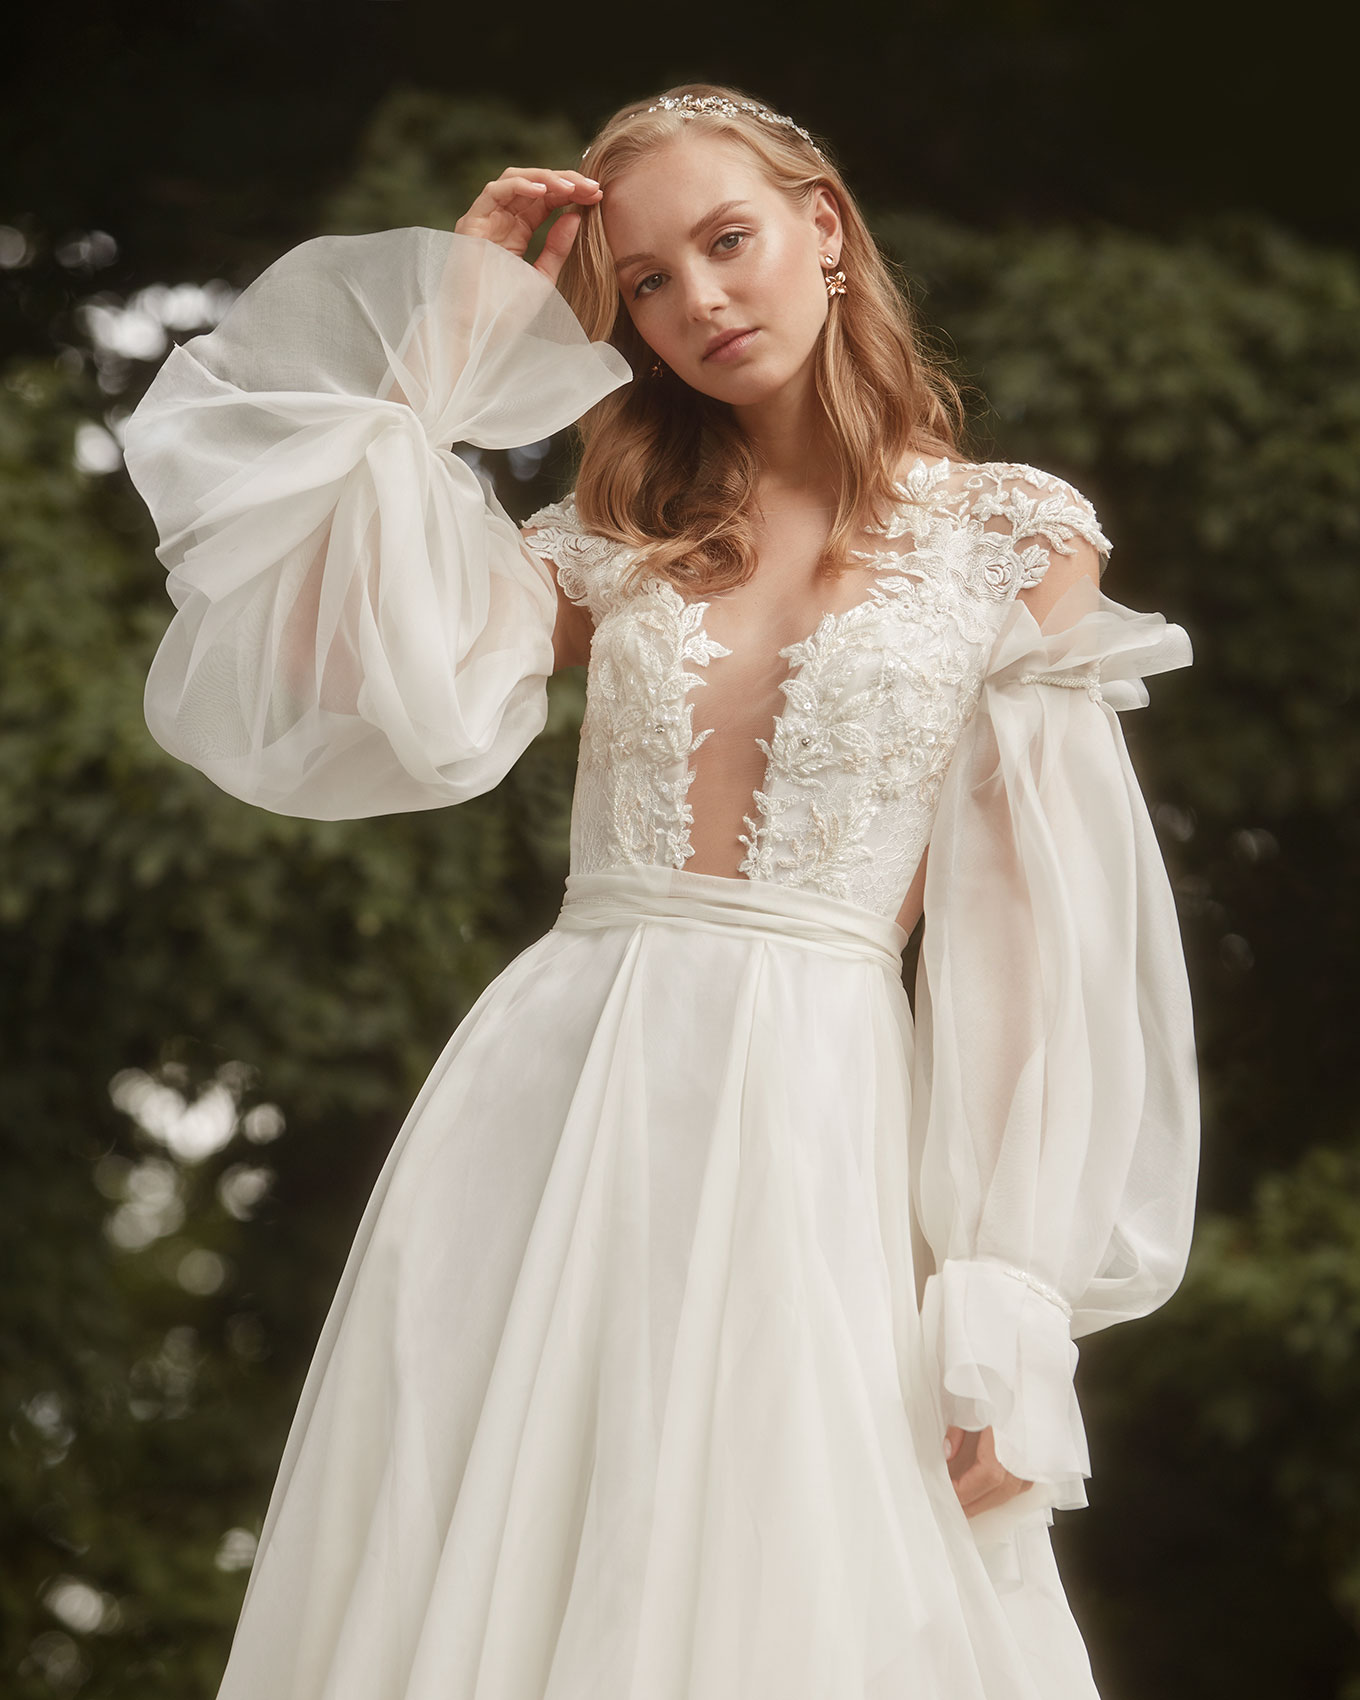 Bridal fashion photograph featuring model in park.